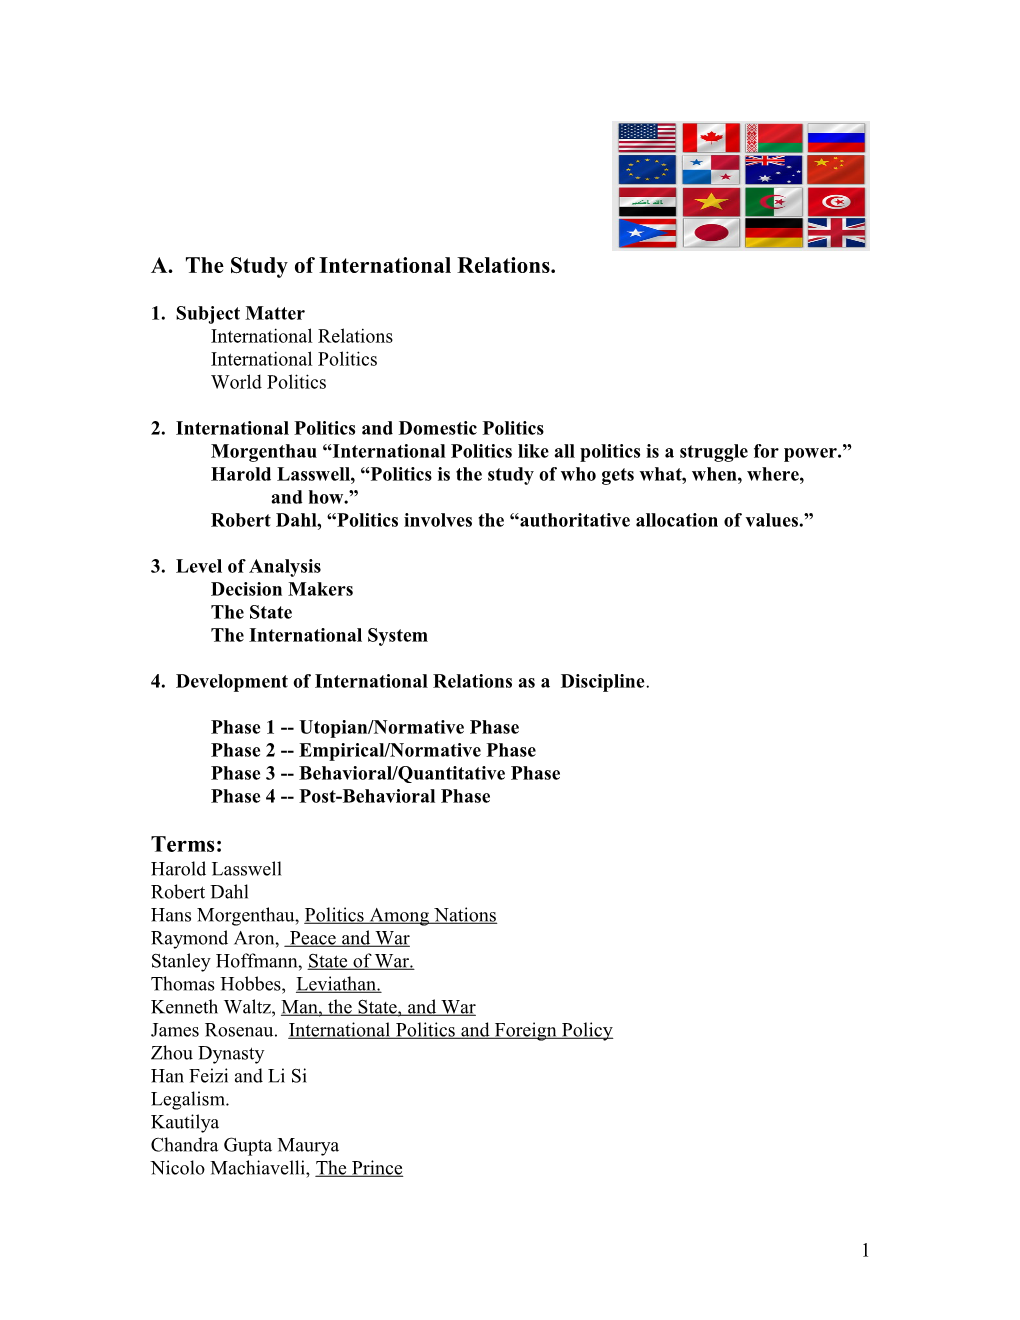 A. the Study of International Relations